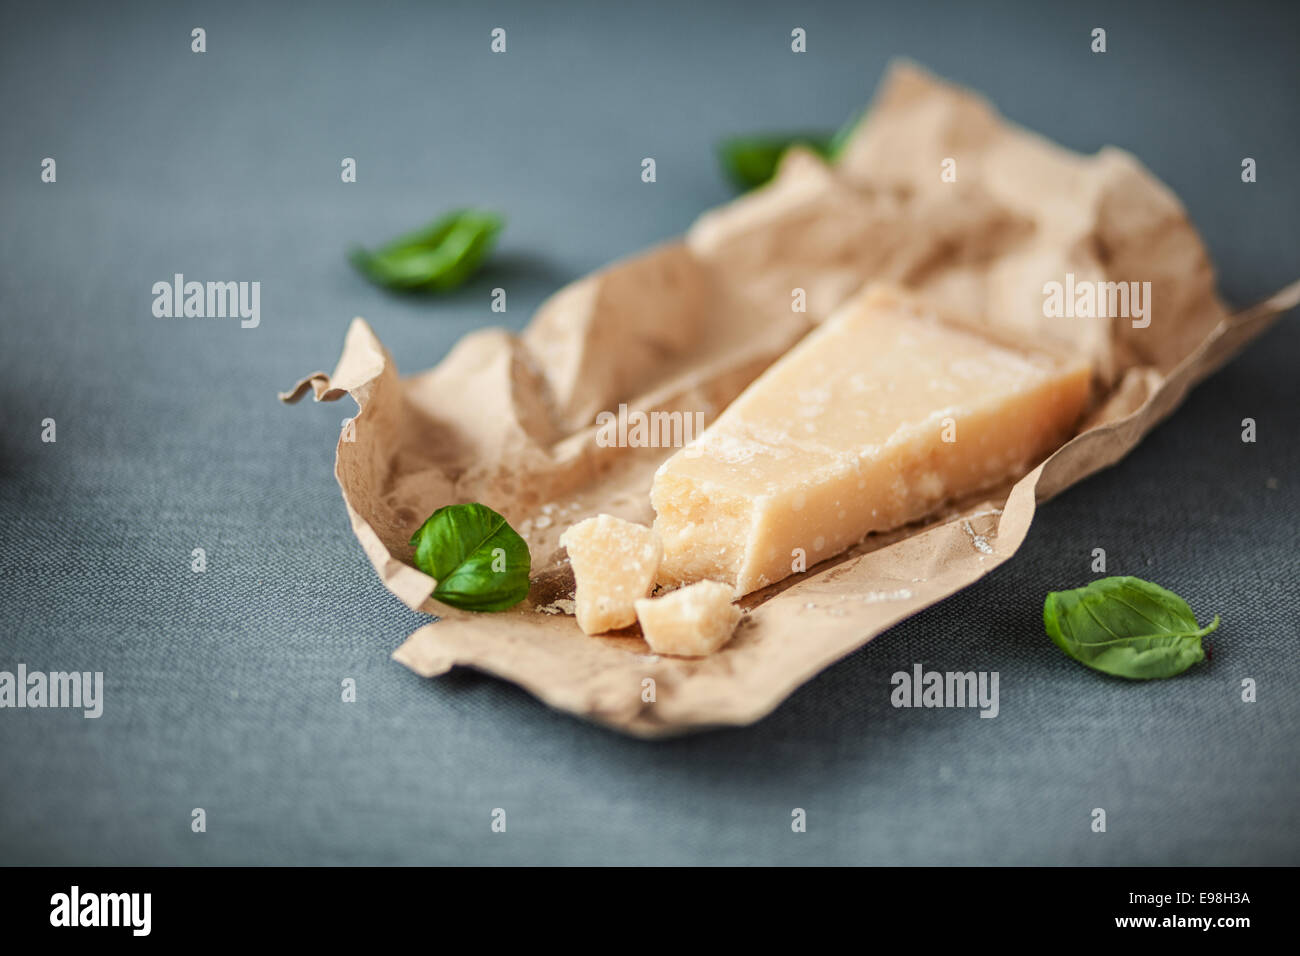 https://c8.alamy.com/comp/E98H3A/portion-of-mature-italian-parmesan-cheese-with-a-traditional-hard-E98H3A.jpg